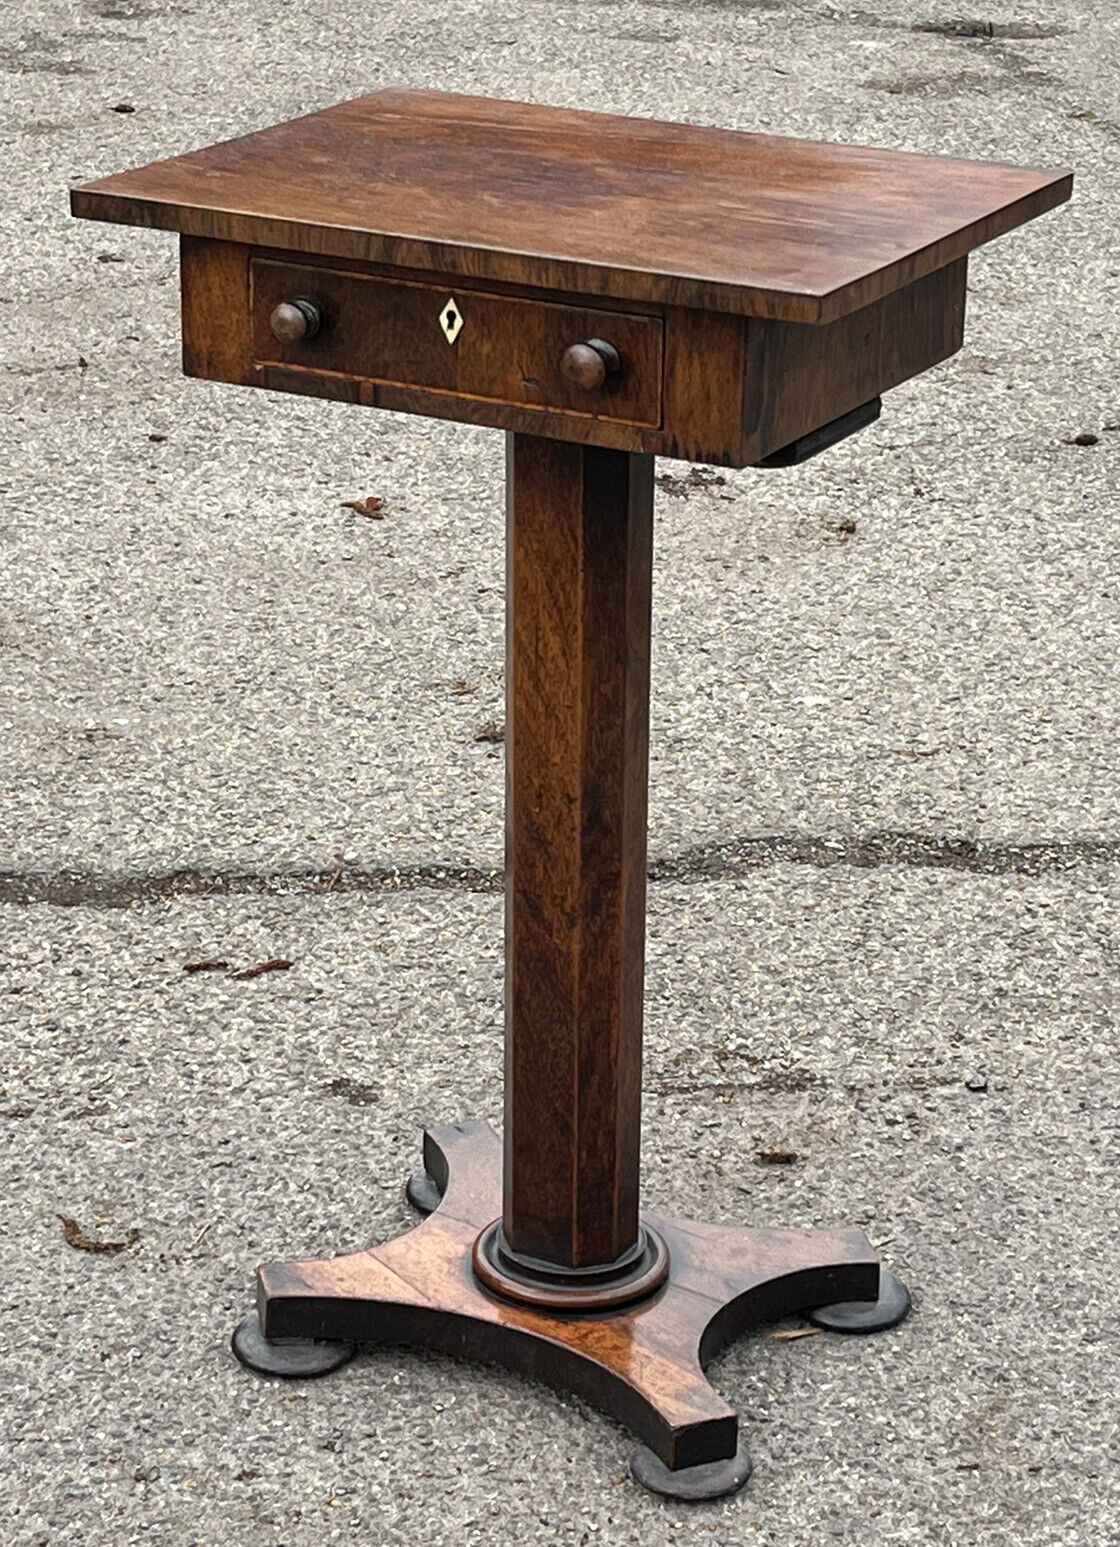 Victorian Mahogany Lamp Table, Side Table With Drawer.